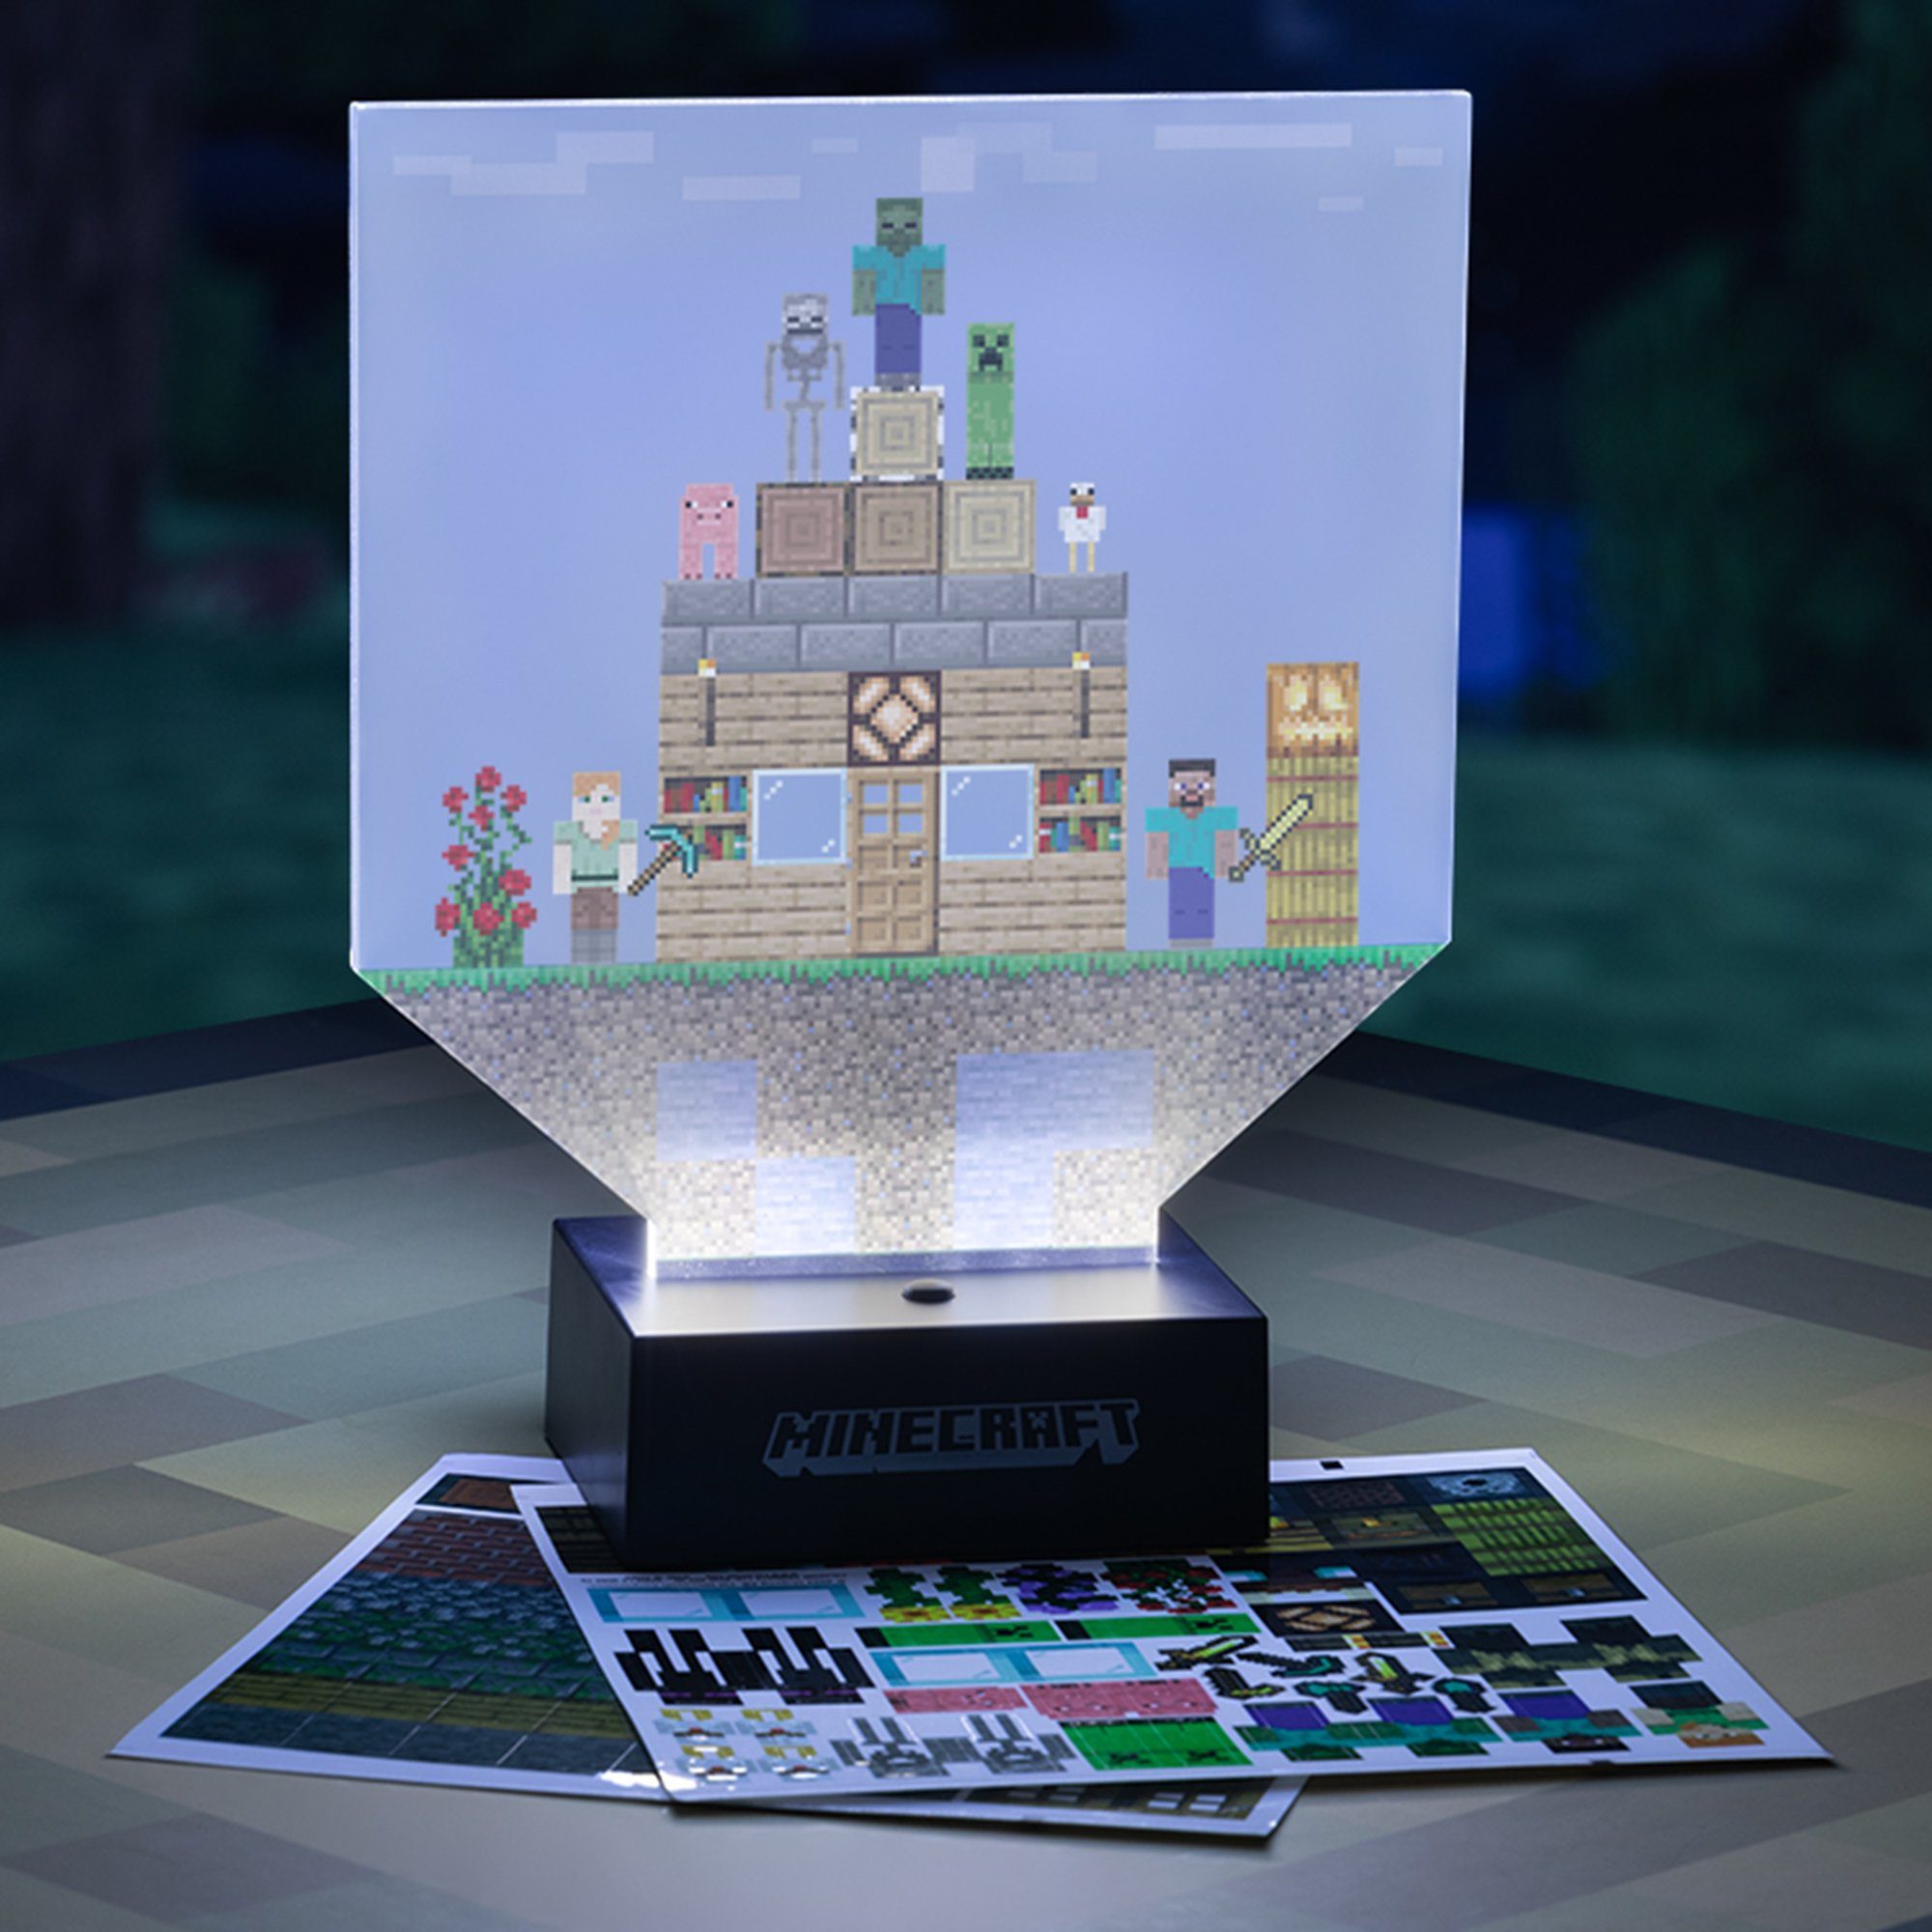 Paladone Stehlampe a Build Level Minecraft Lampe